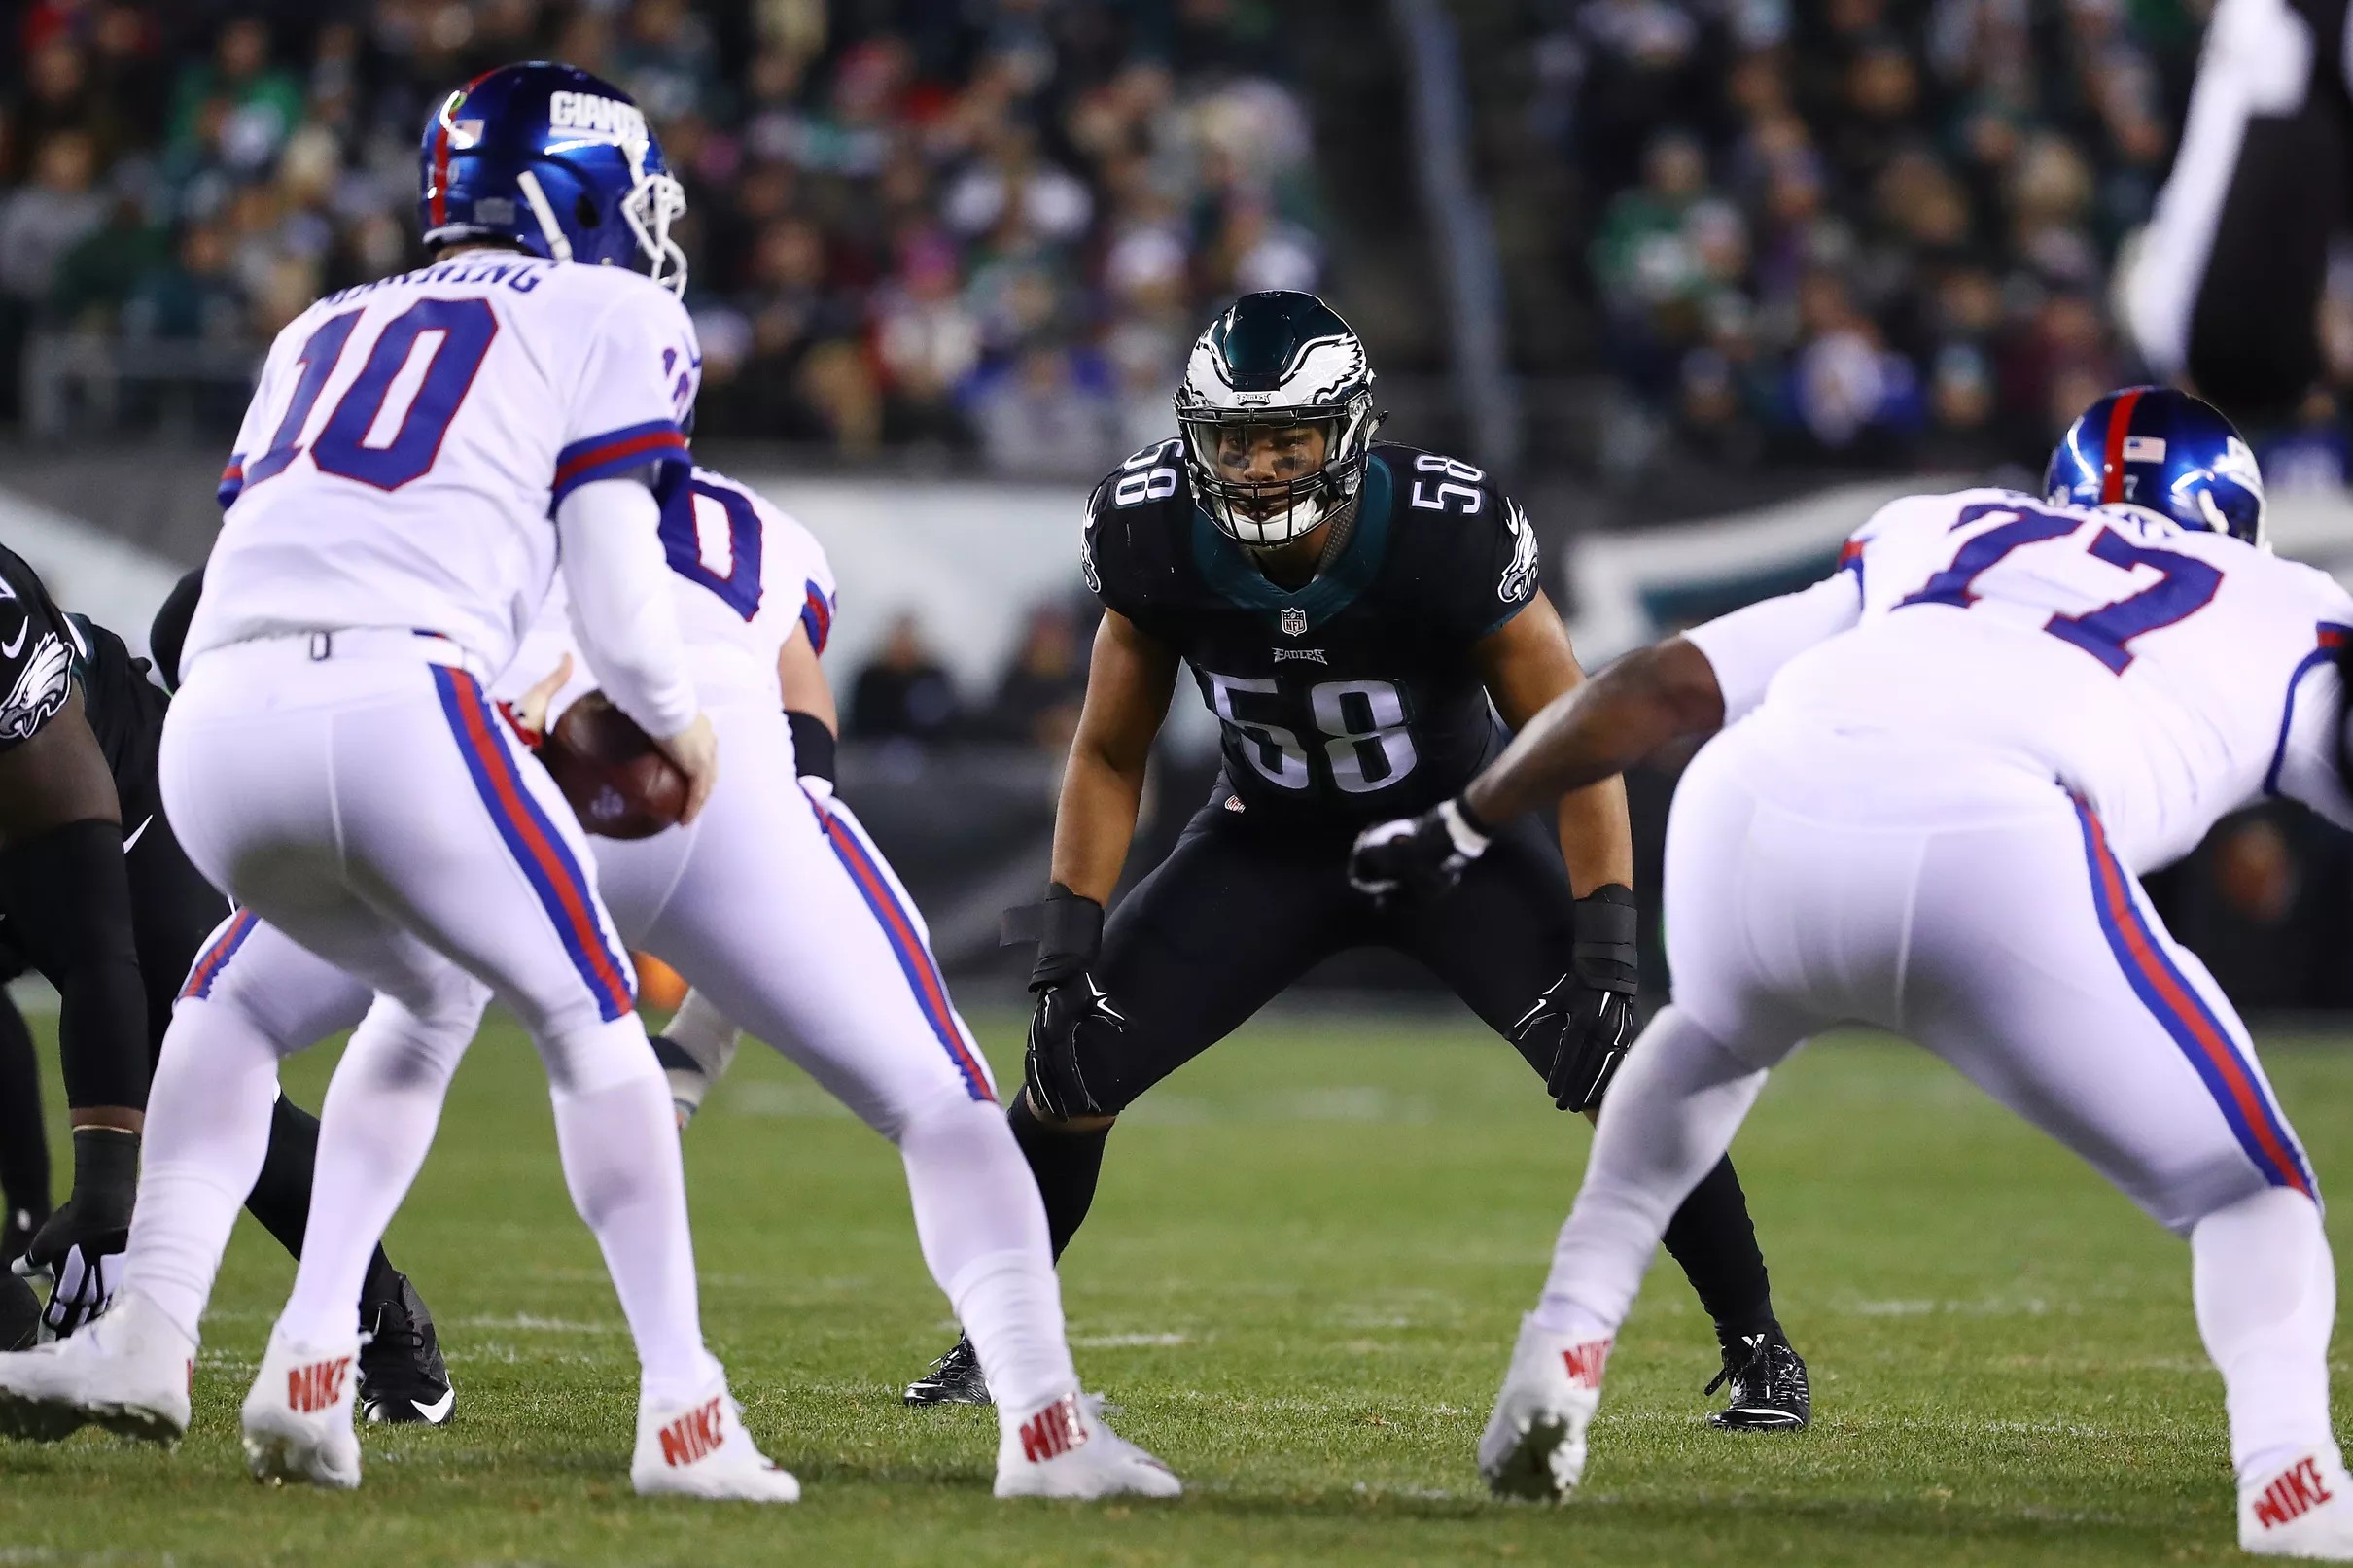 Previewing the EaglesGiants game